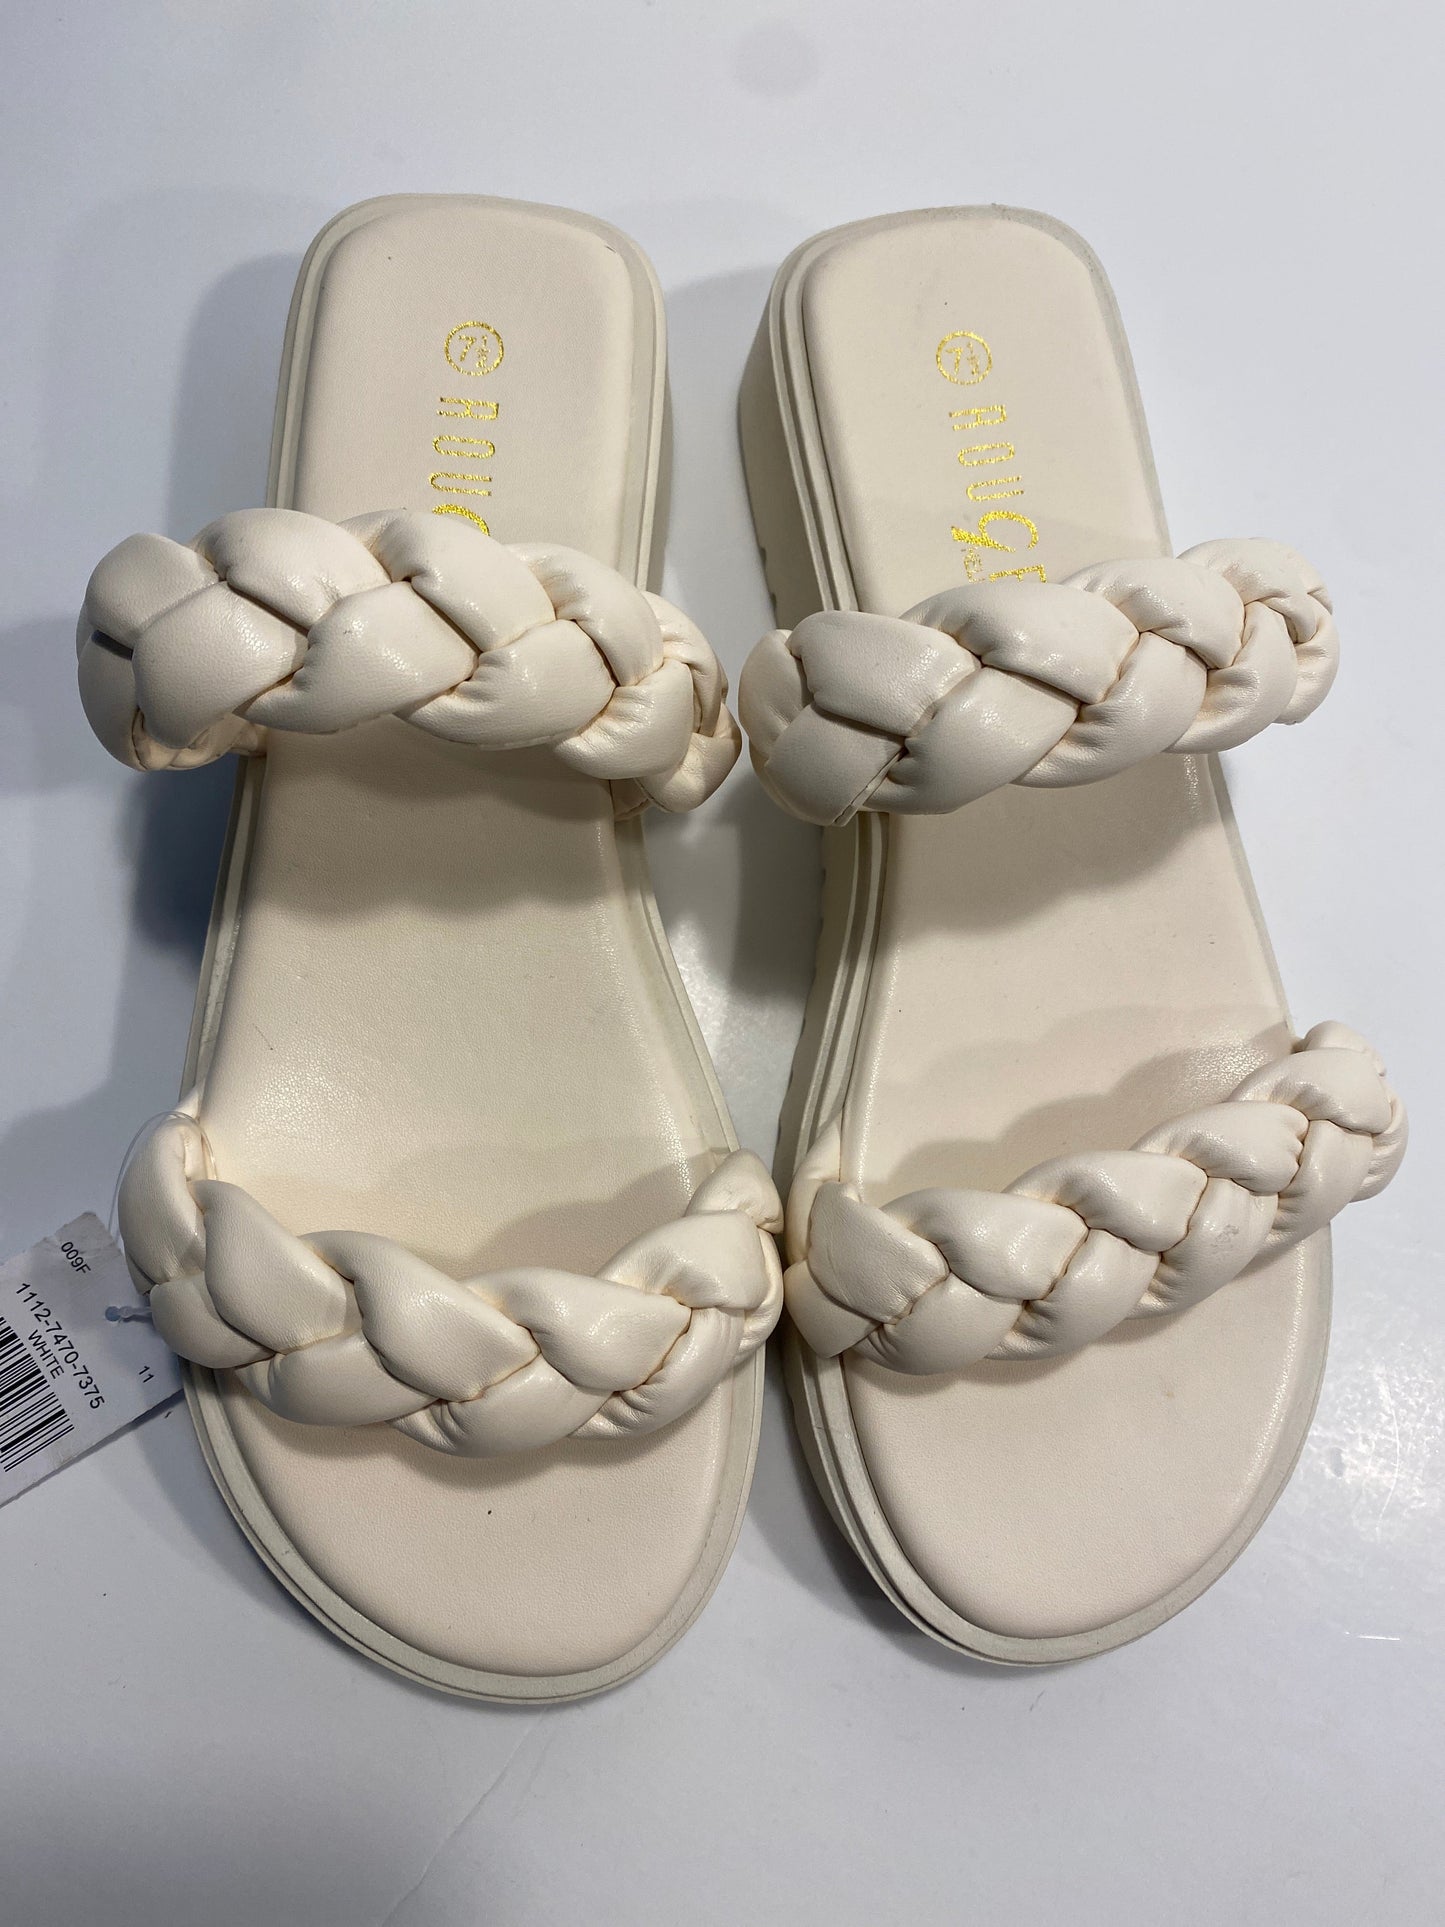 White Sandals Flats Rouge, Size 7.5